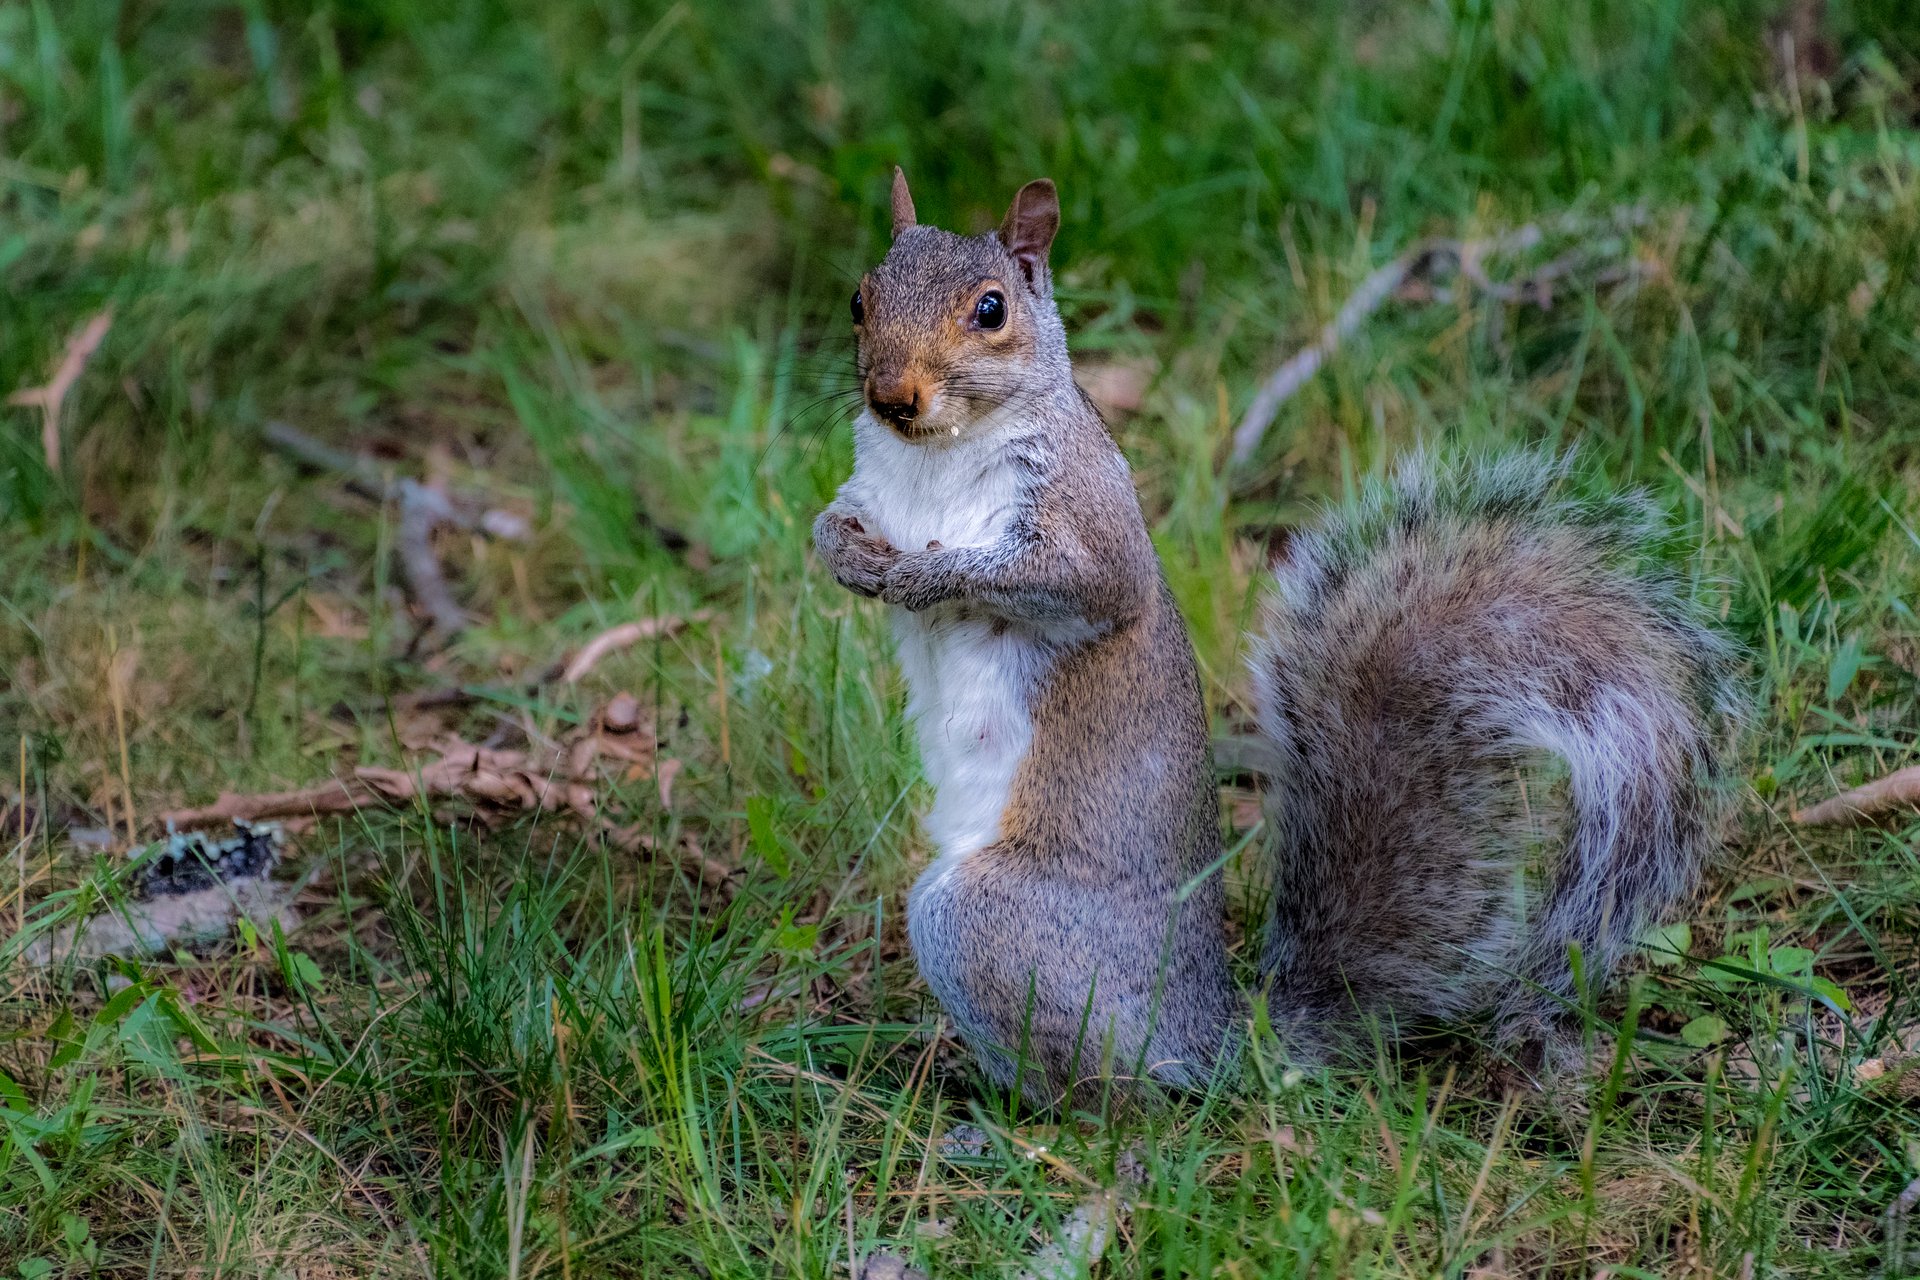 Gray squirrel standing on hind legs looking at camera.